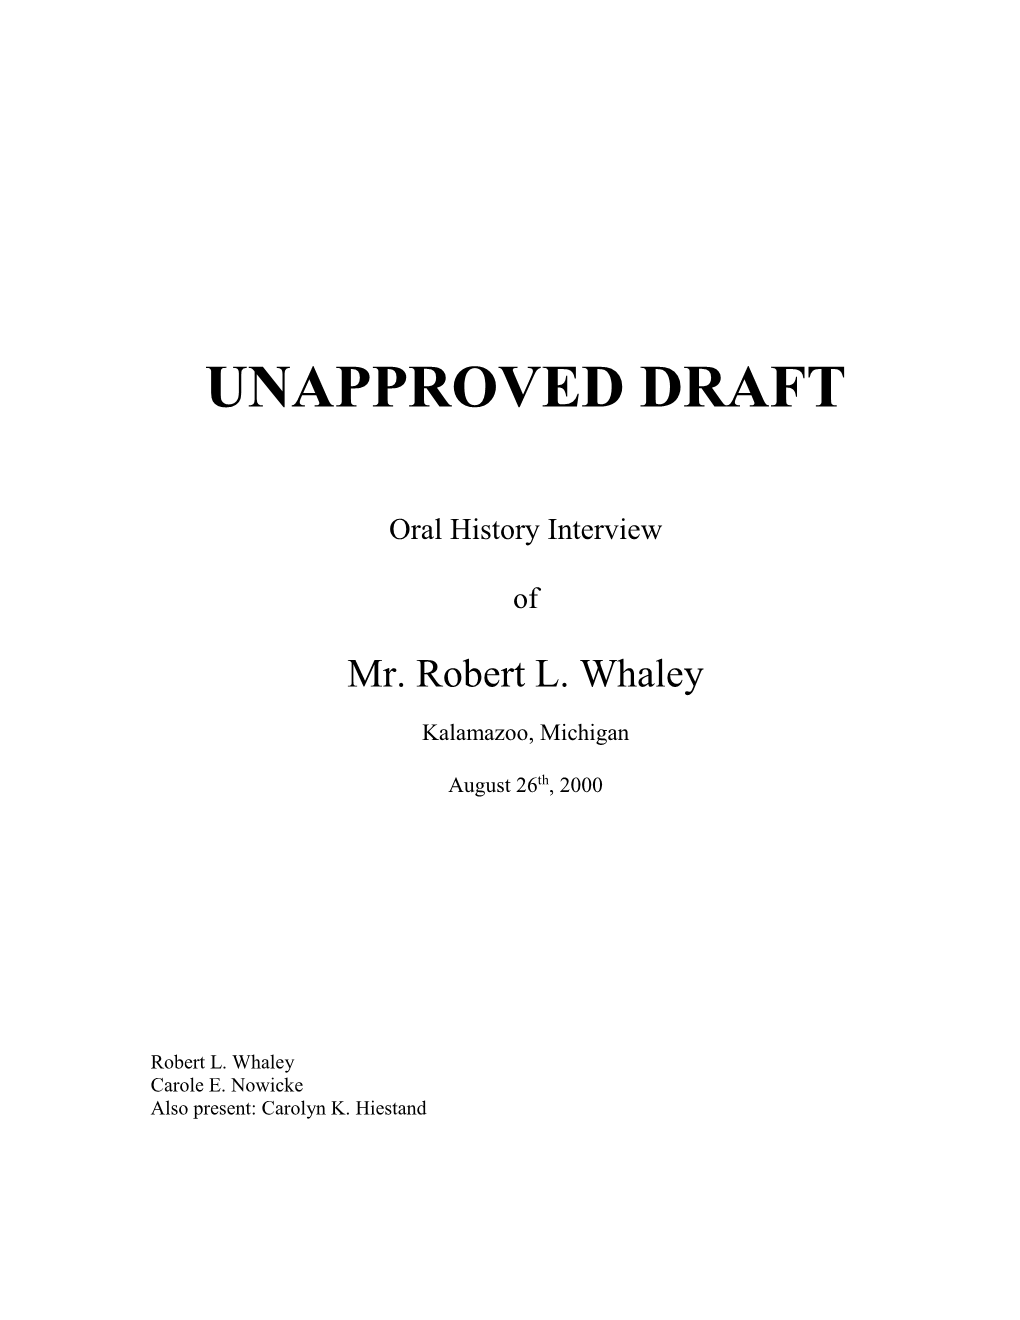 Unapproved Draft